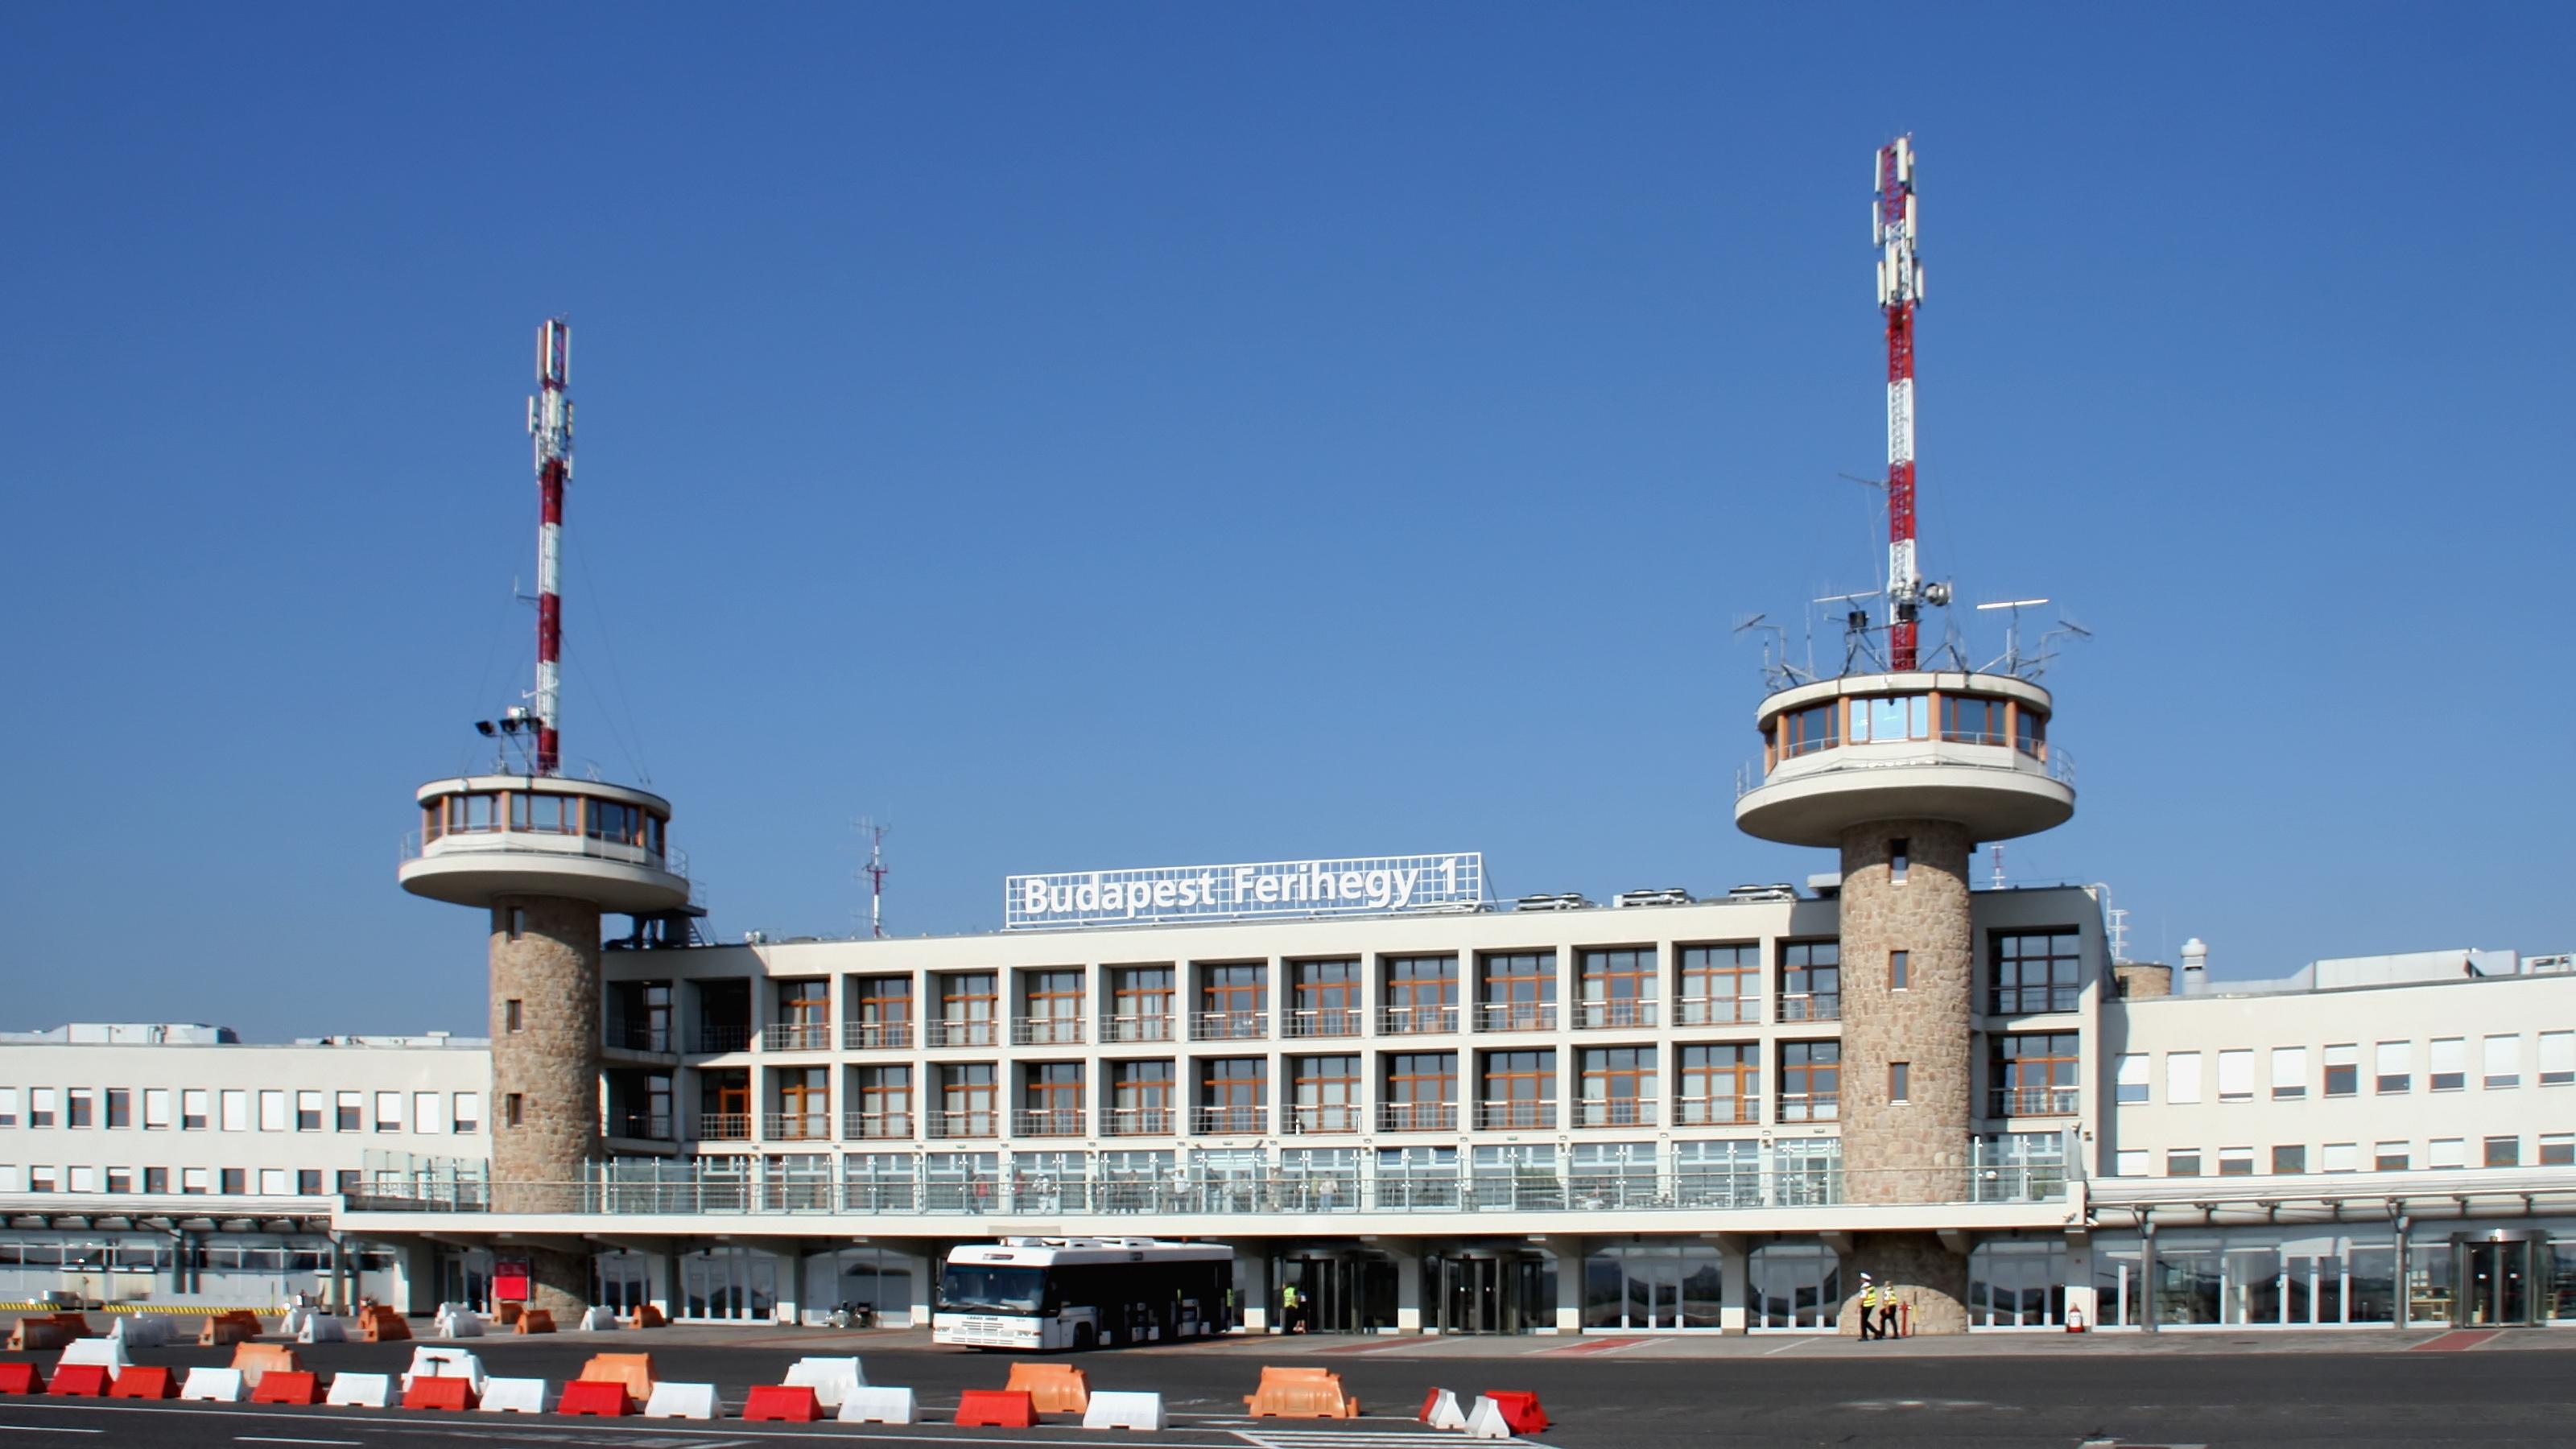 Former Liszt Ferenc Terminal In Budapest Could Be Transformed Into Aviation Exhibition